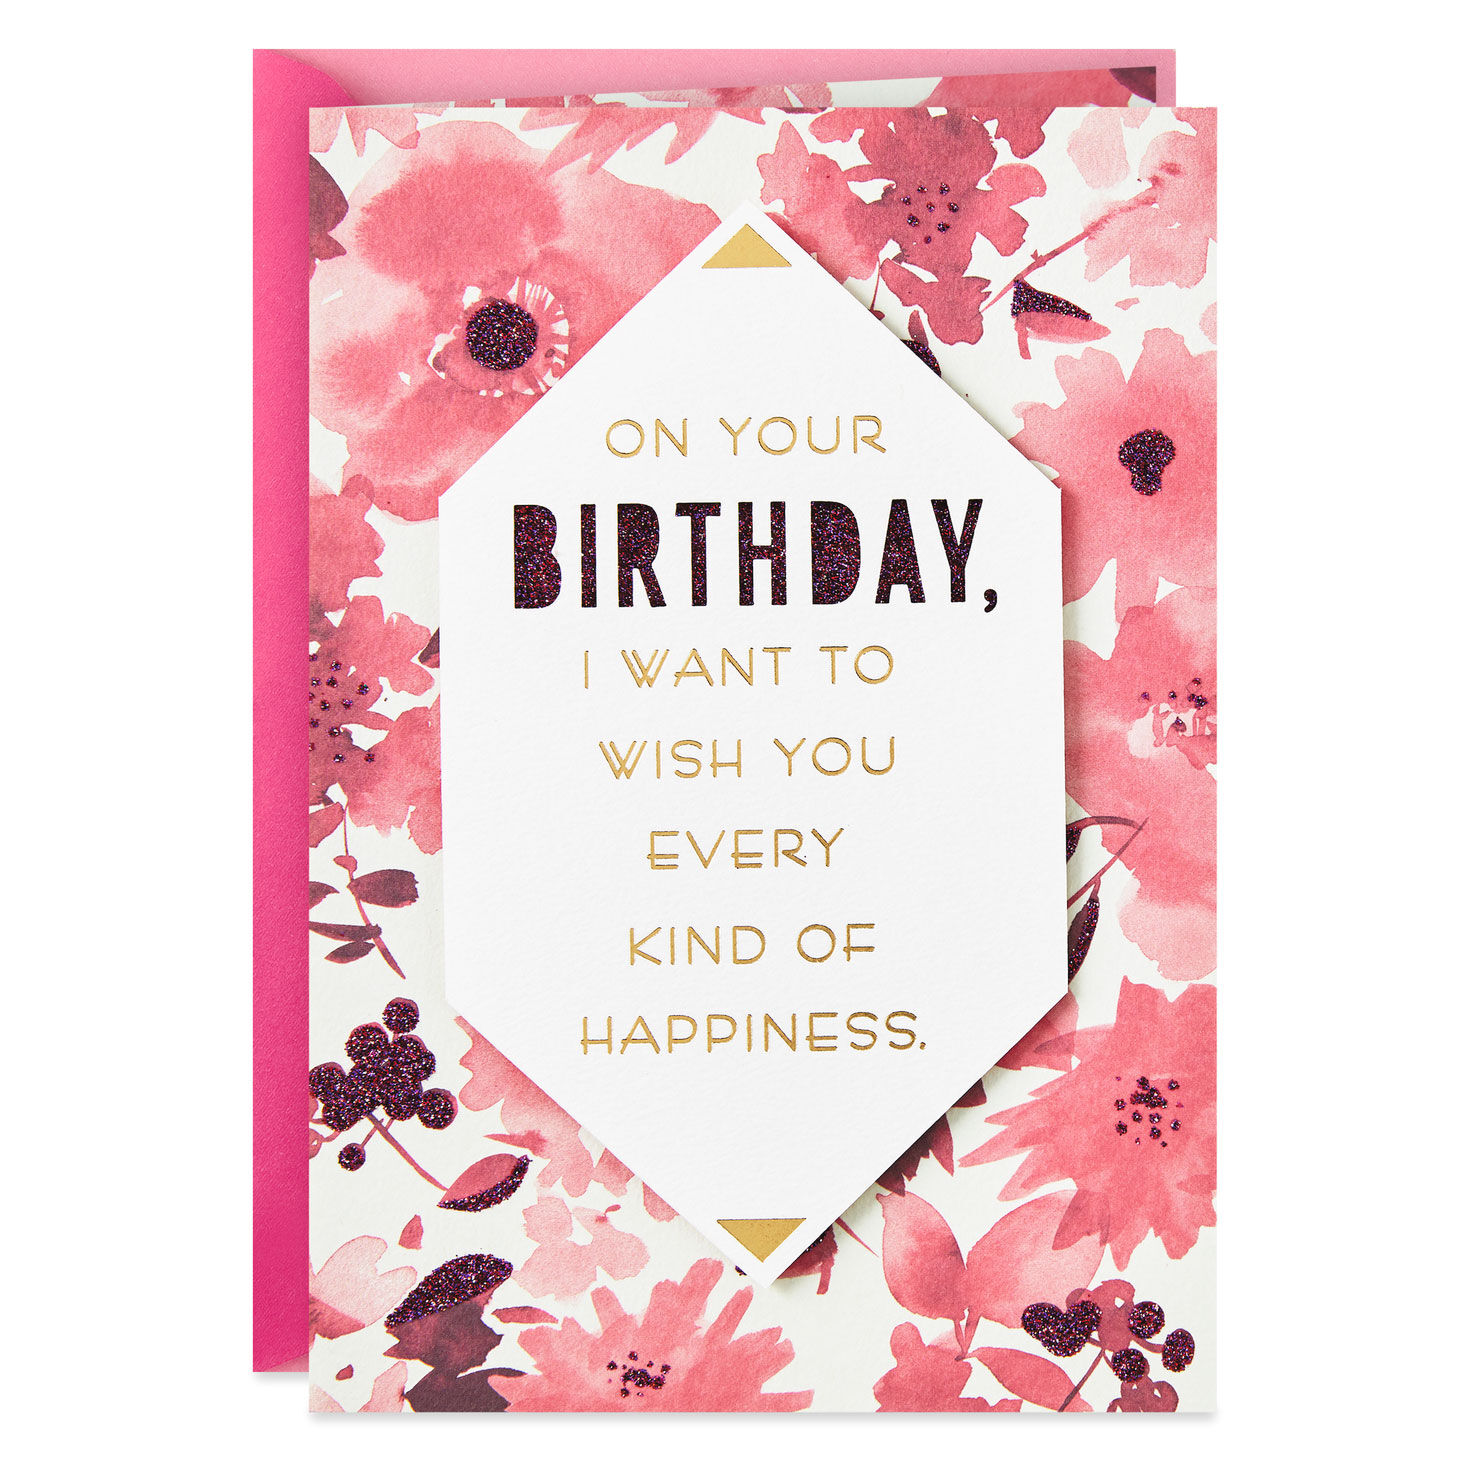 Every Kind of Happiness Pink Flowers Birthday Card for only USD 6.99 | Hallmark